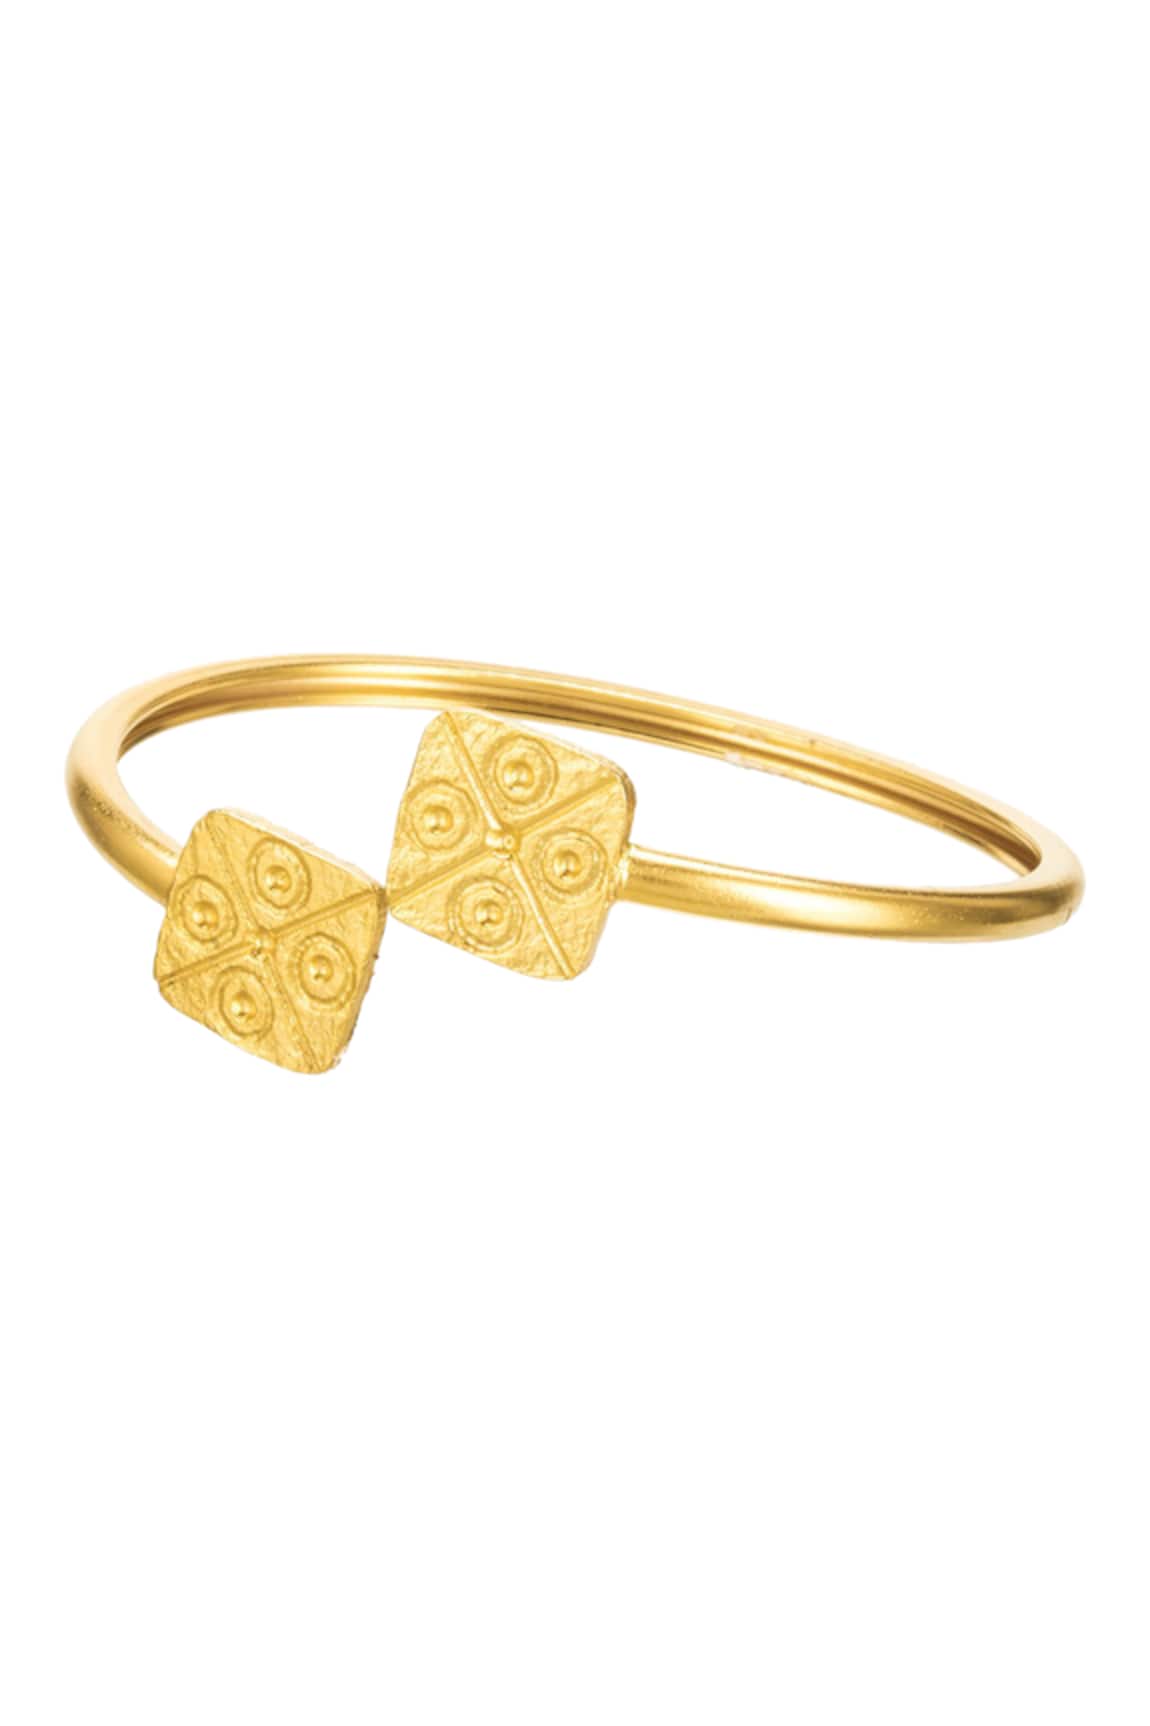 Zohra Carved Geometric Cuff - single pc only